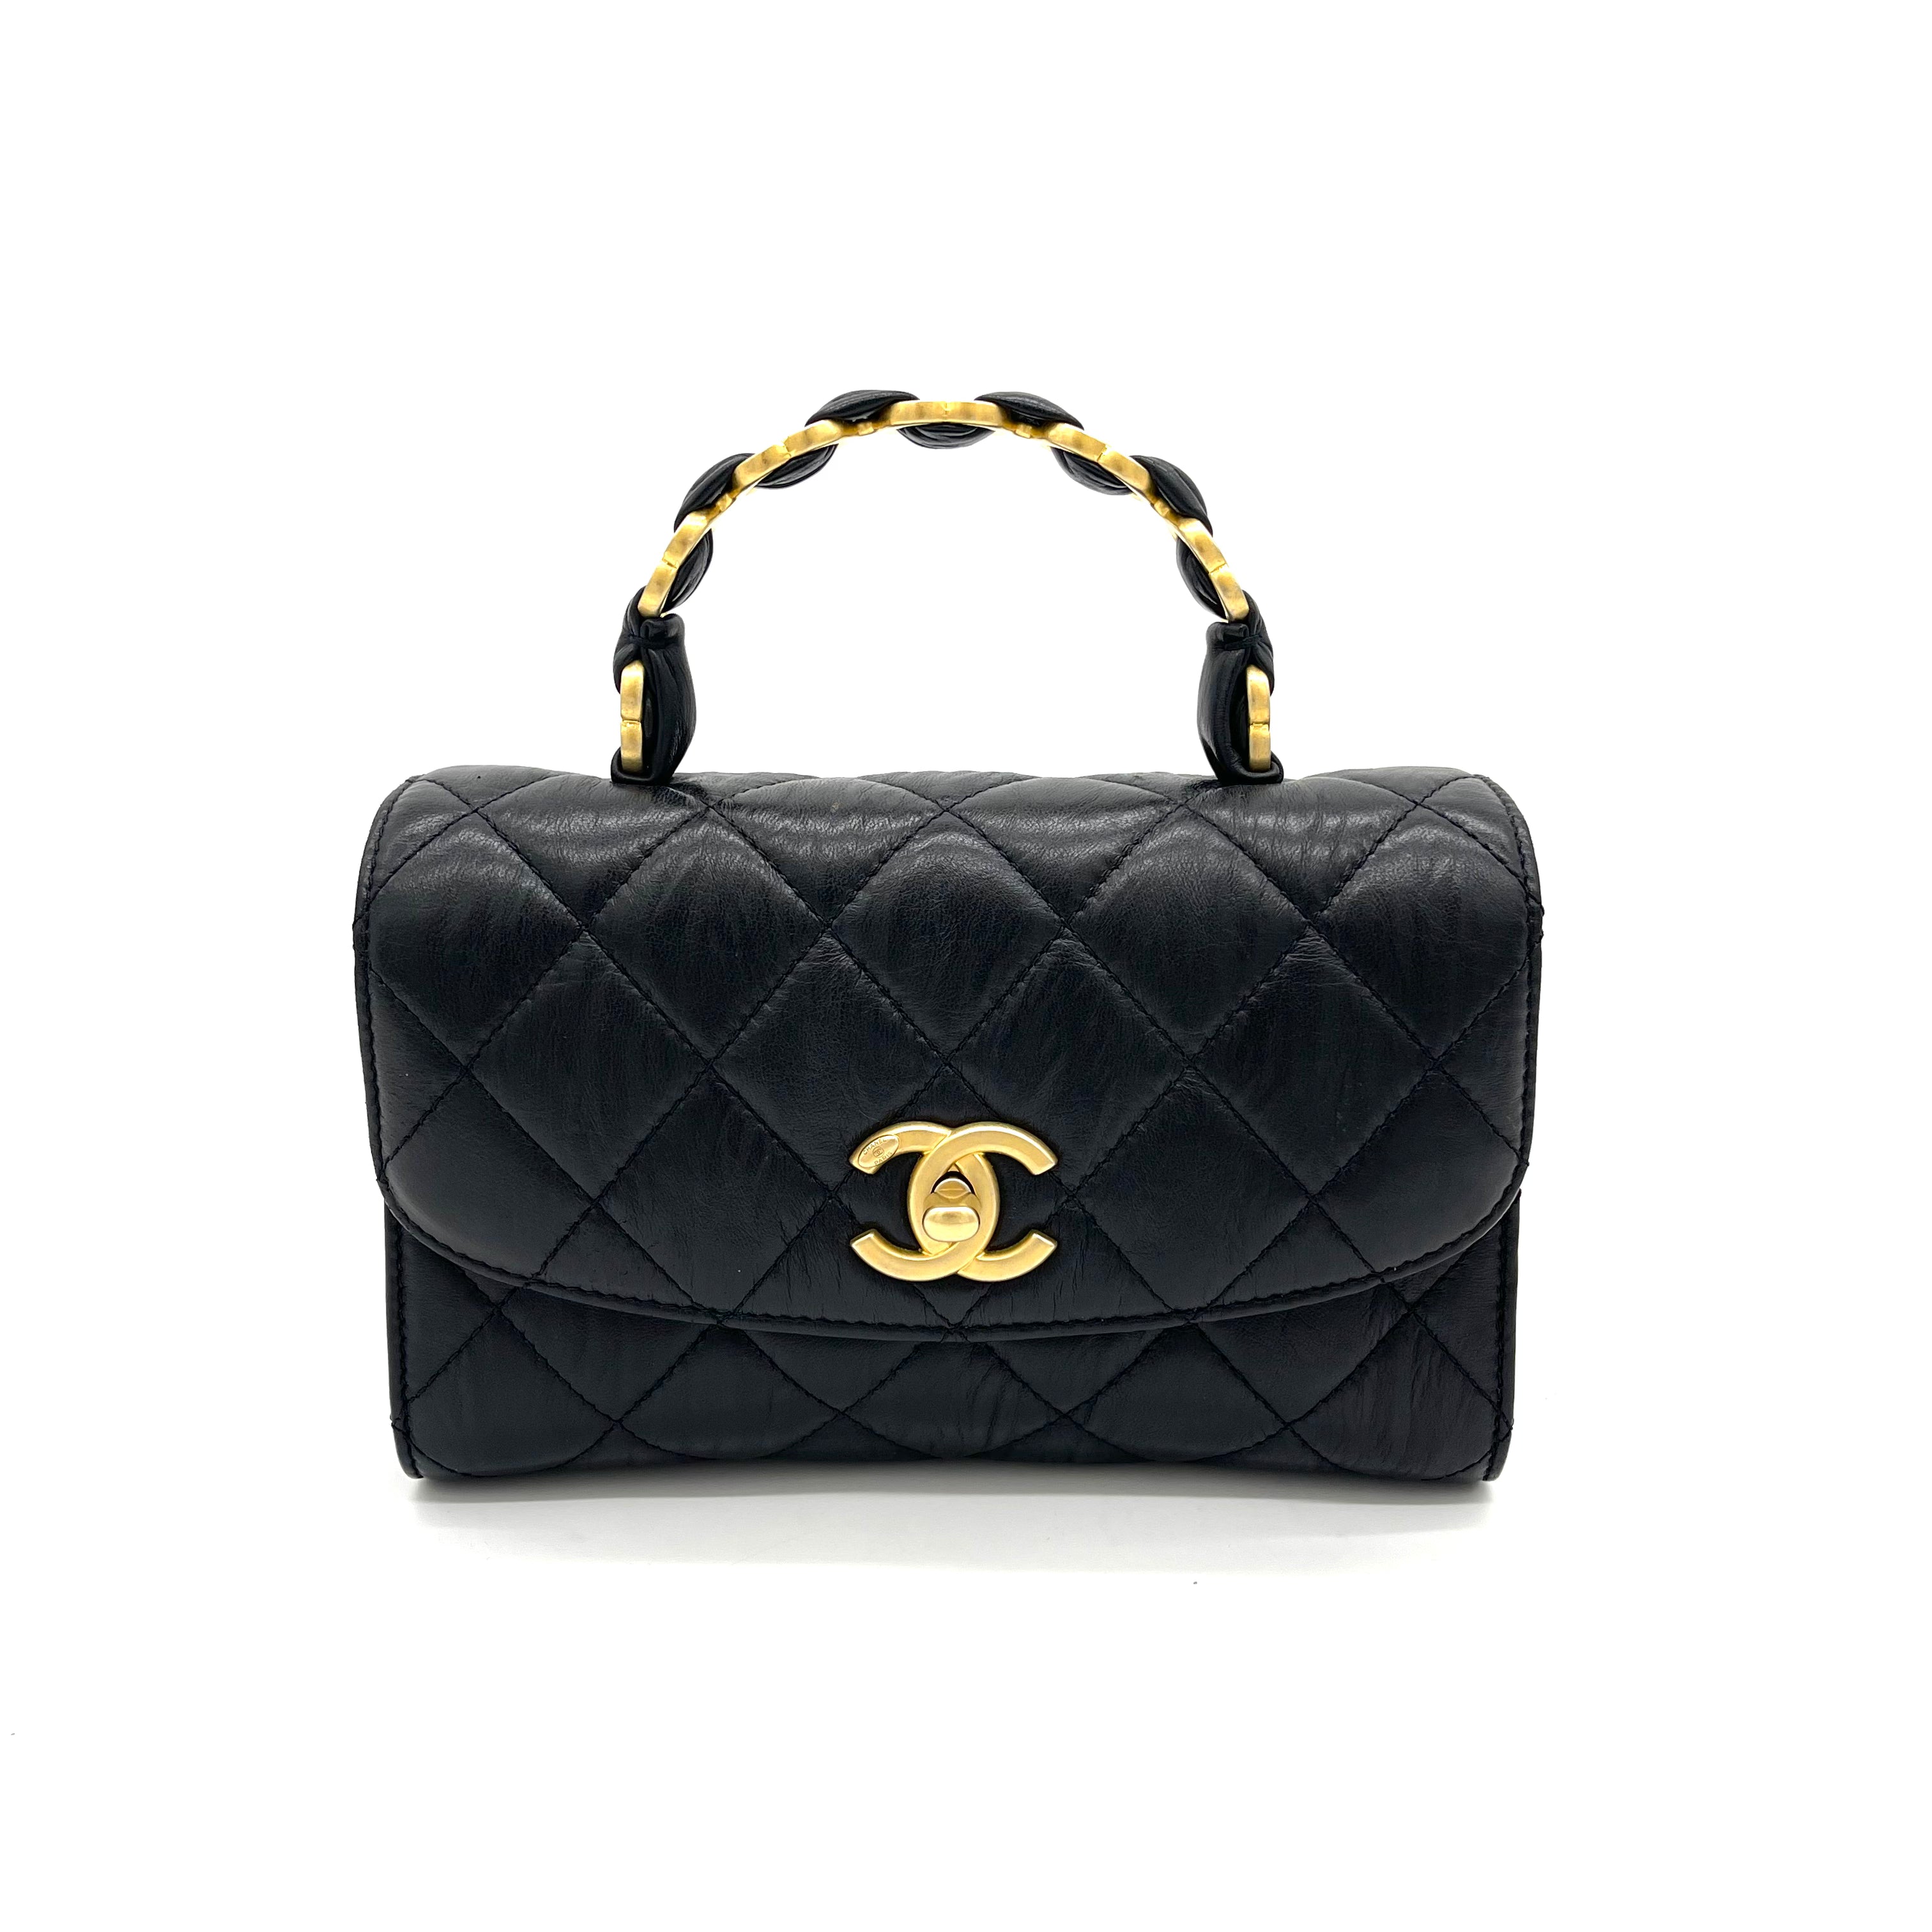 Chanel Black Quilted Lambskin CC Hobo Bag Aged Gold Hardware, 2021